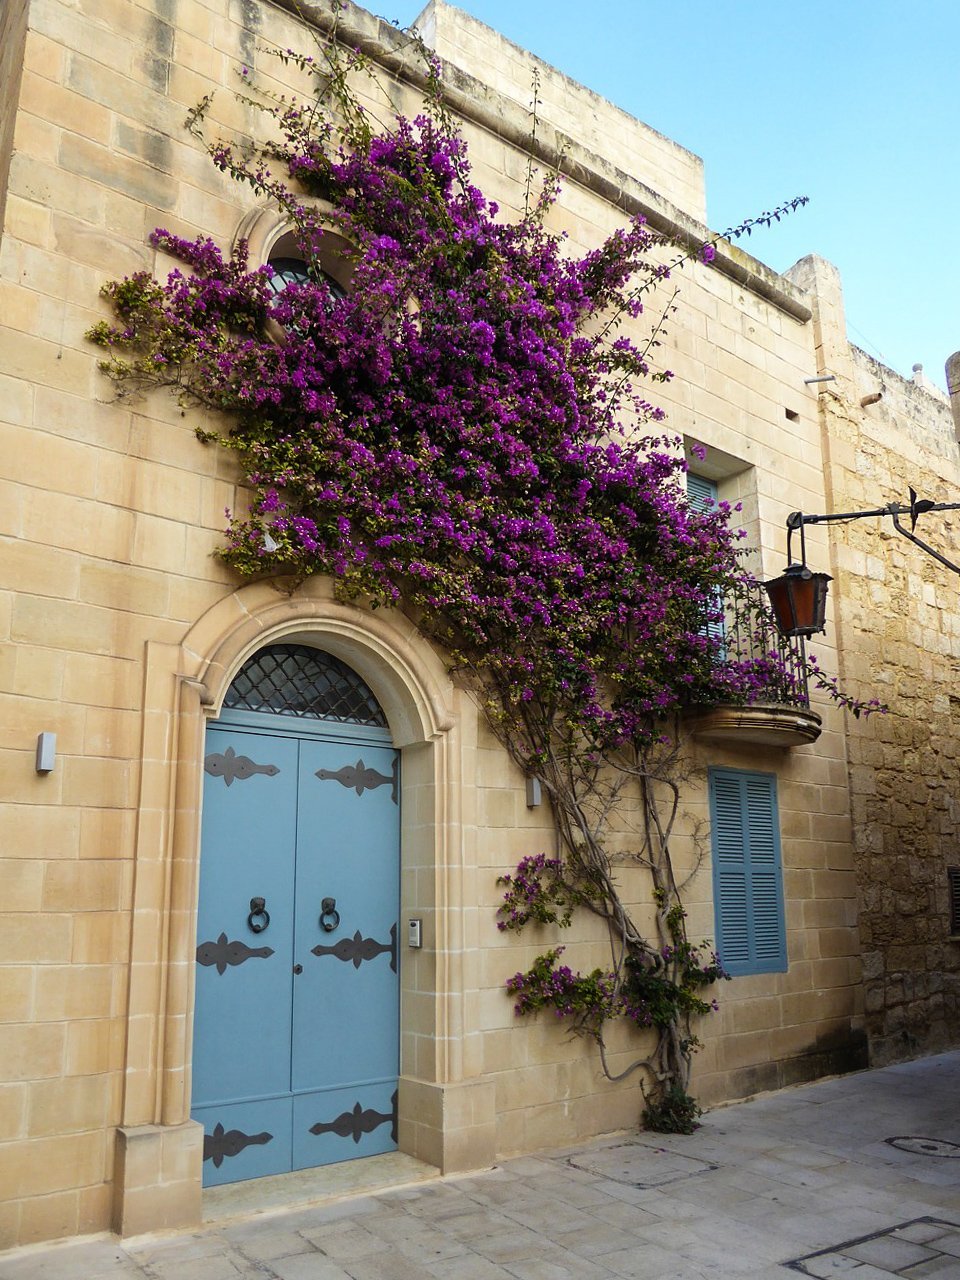 20 Photos That Will Make You Want To Visit Malta And Gozo